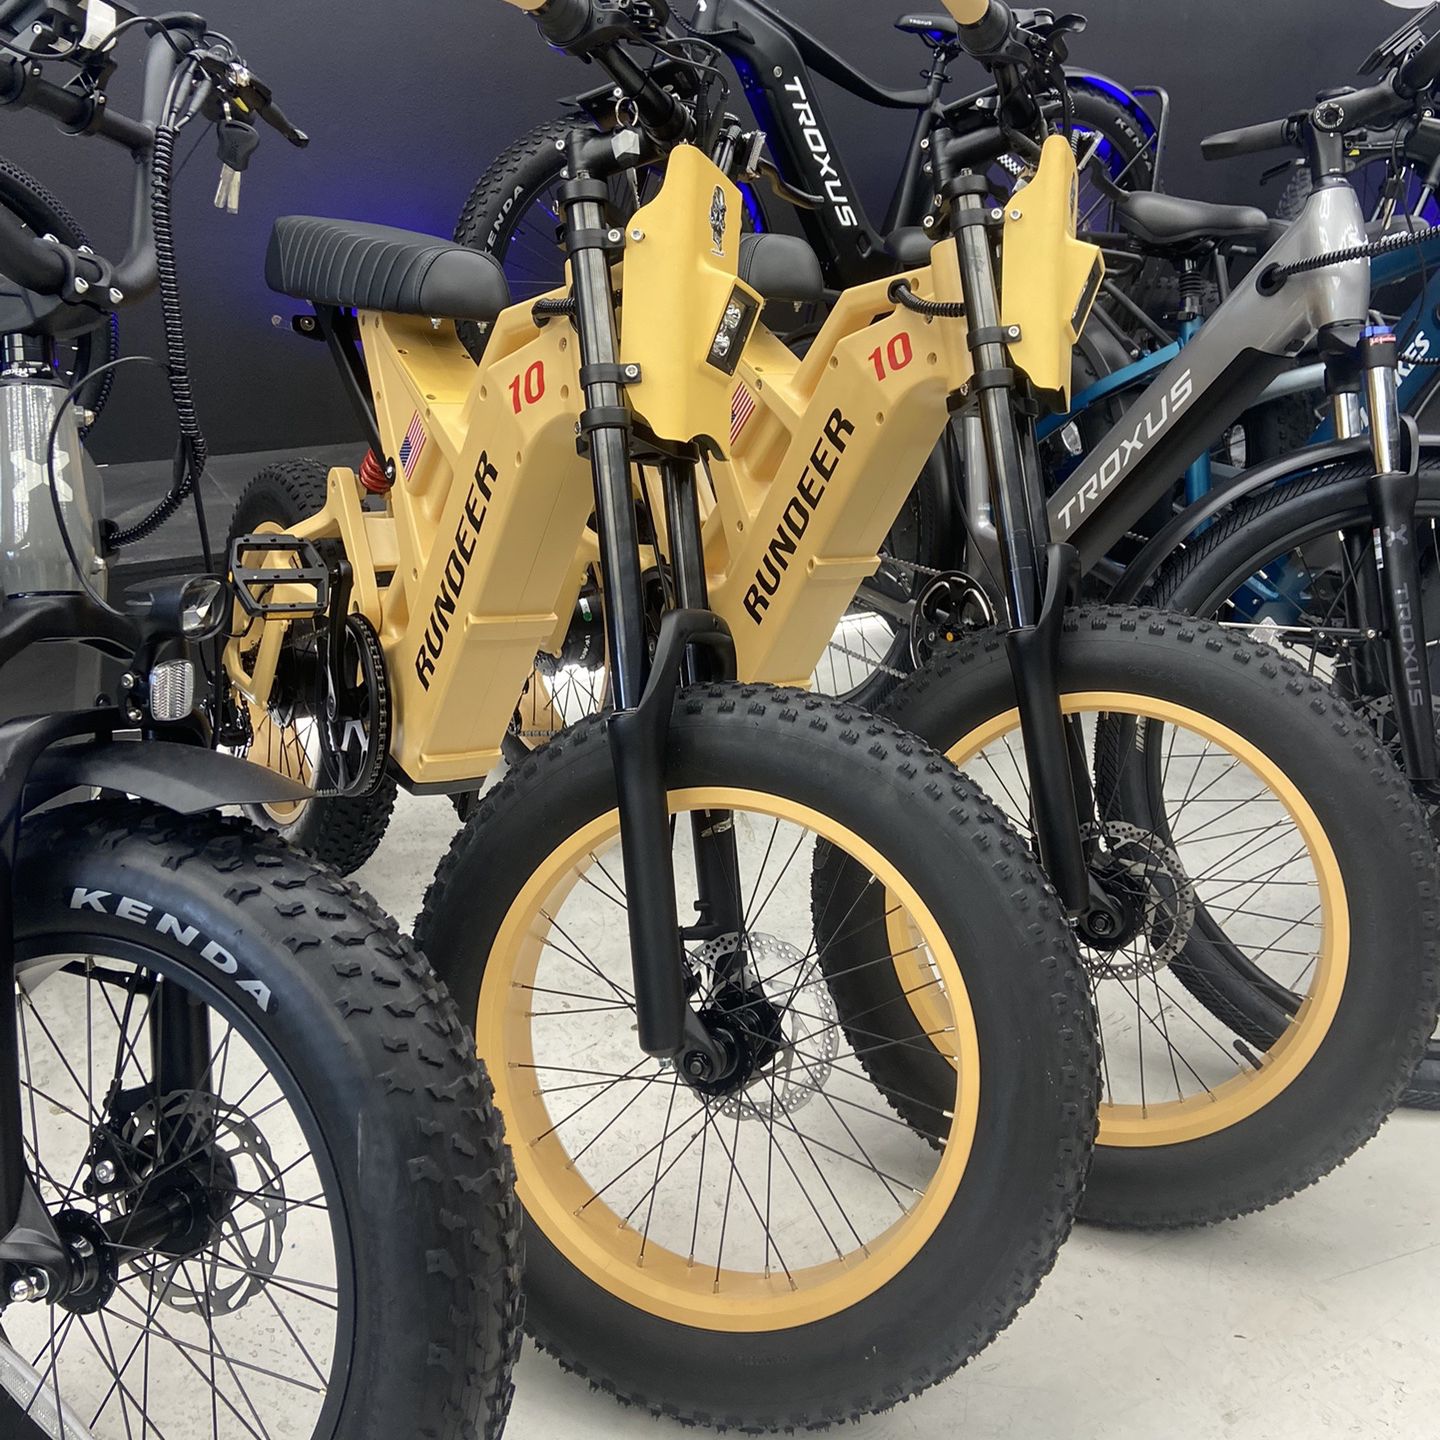 New Rundeer Attack 10 Electric Bike! Ez Payment Plans Available 